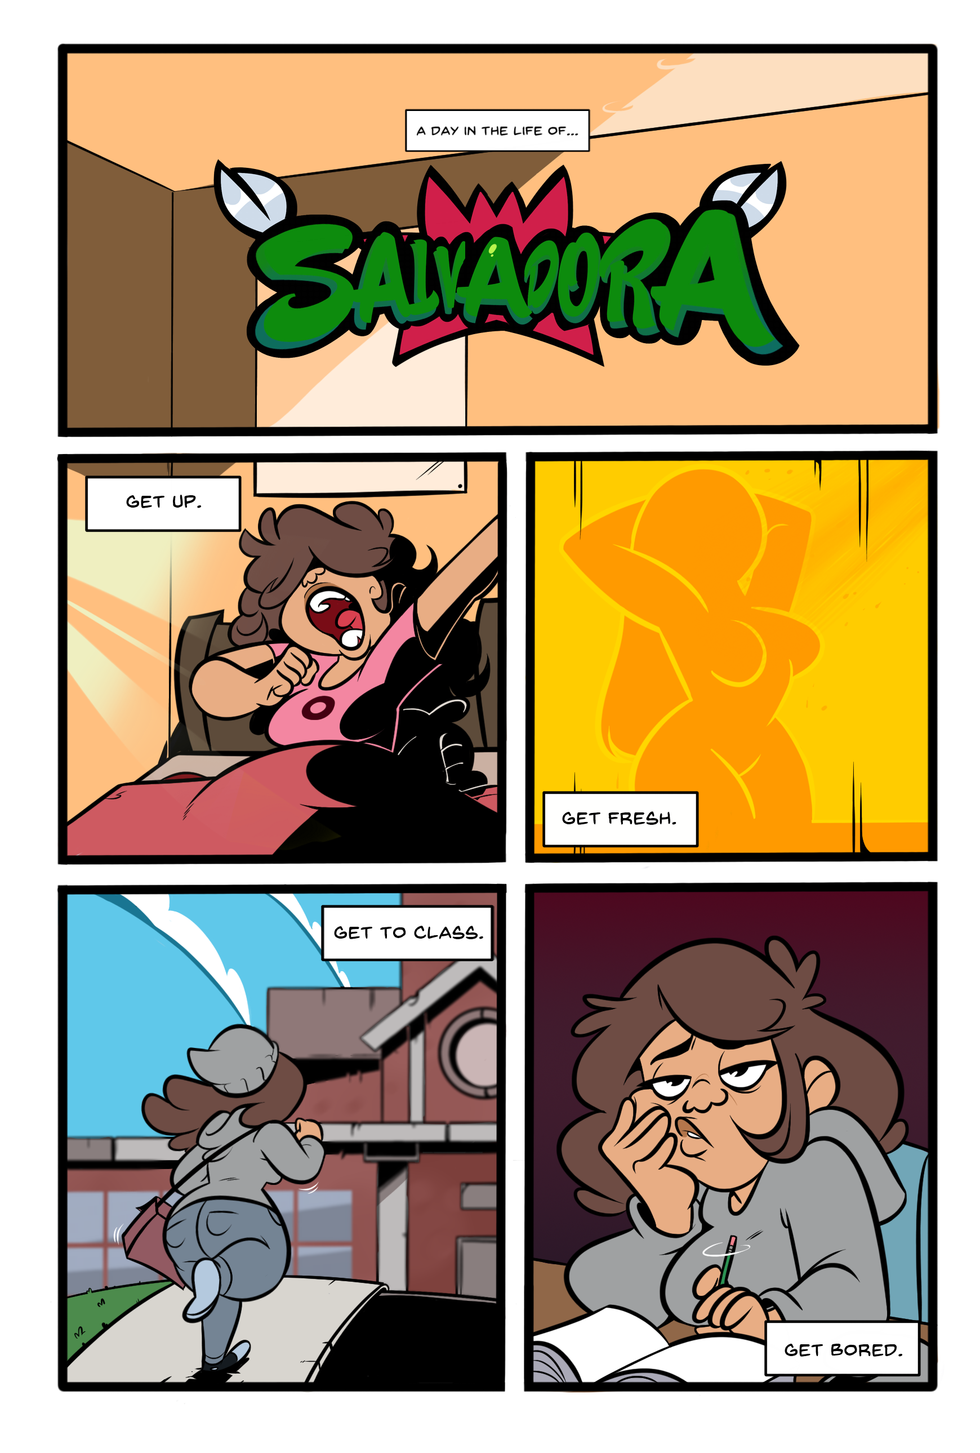 a day in the life of salvadora 1